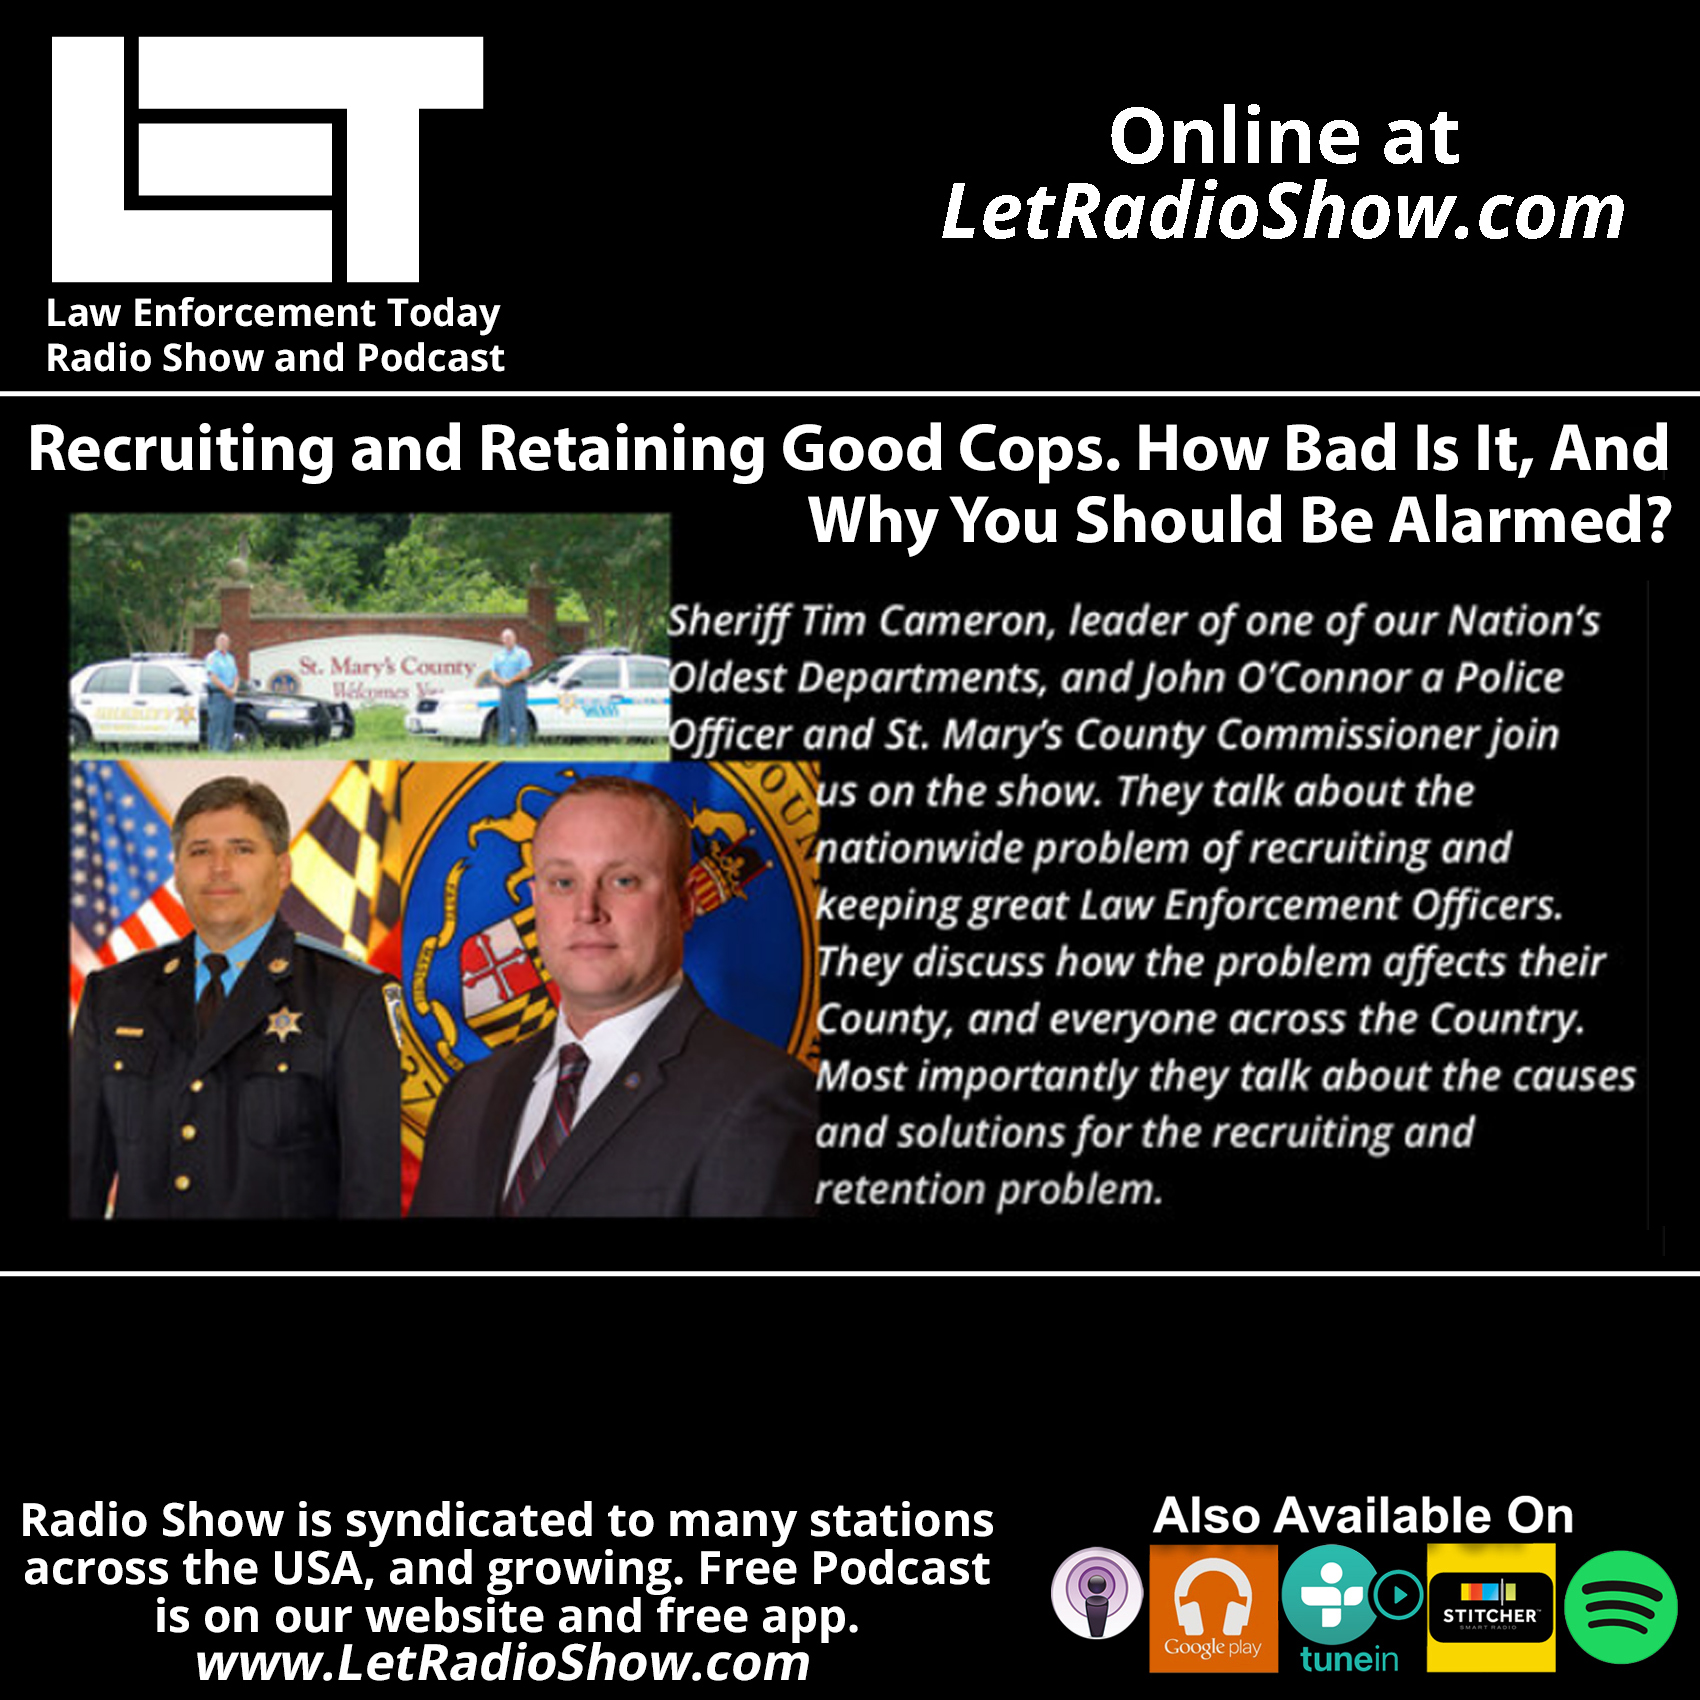 Recruiting and Retaining Good Police Officers . How Bad Is It Across the US? Special Episode.